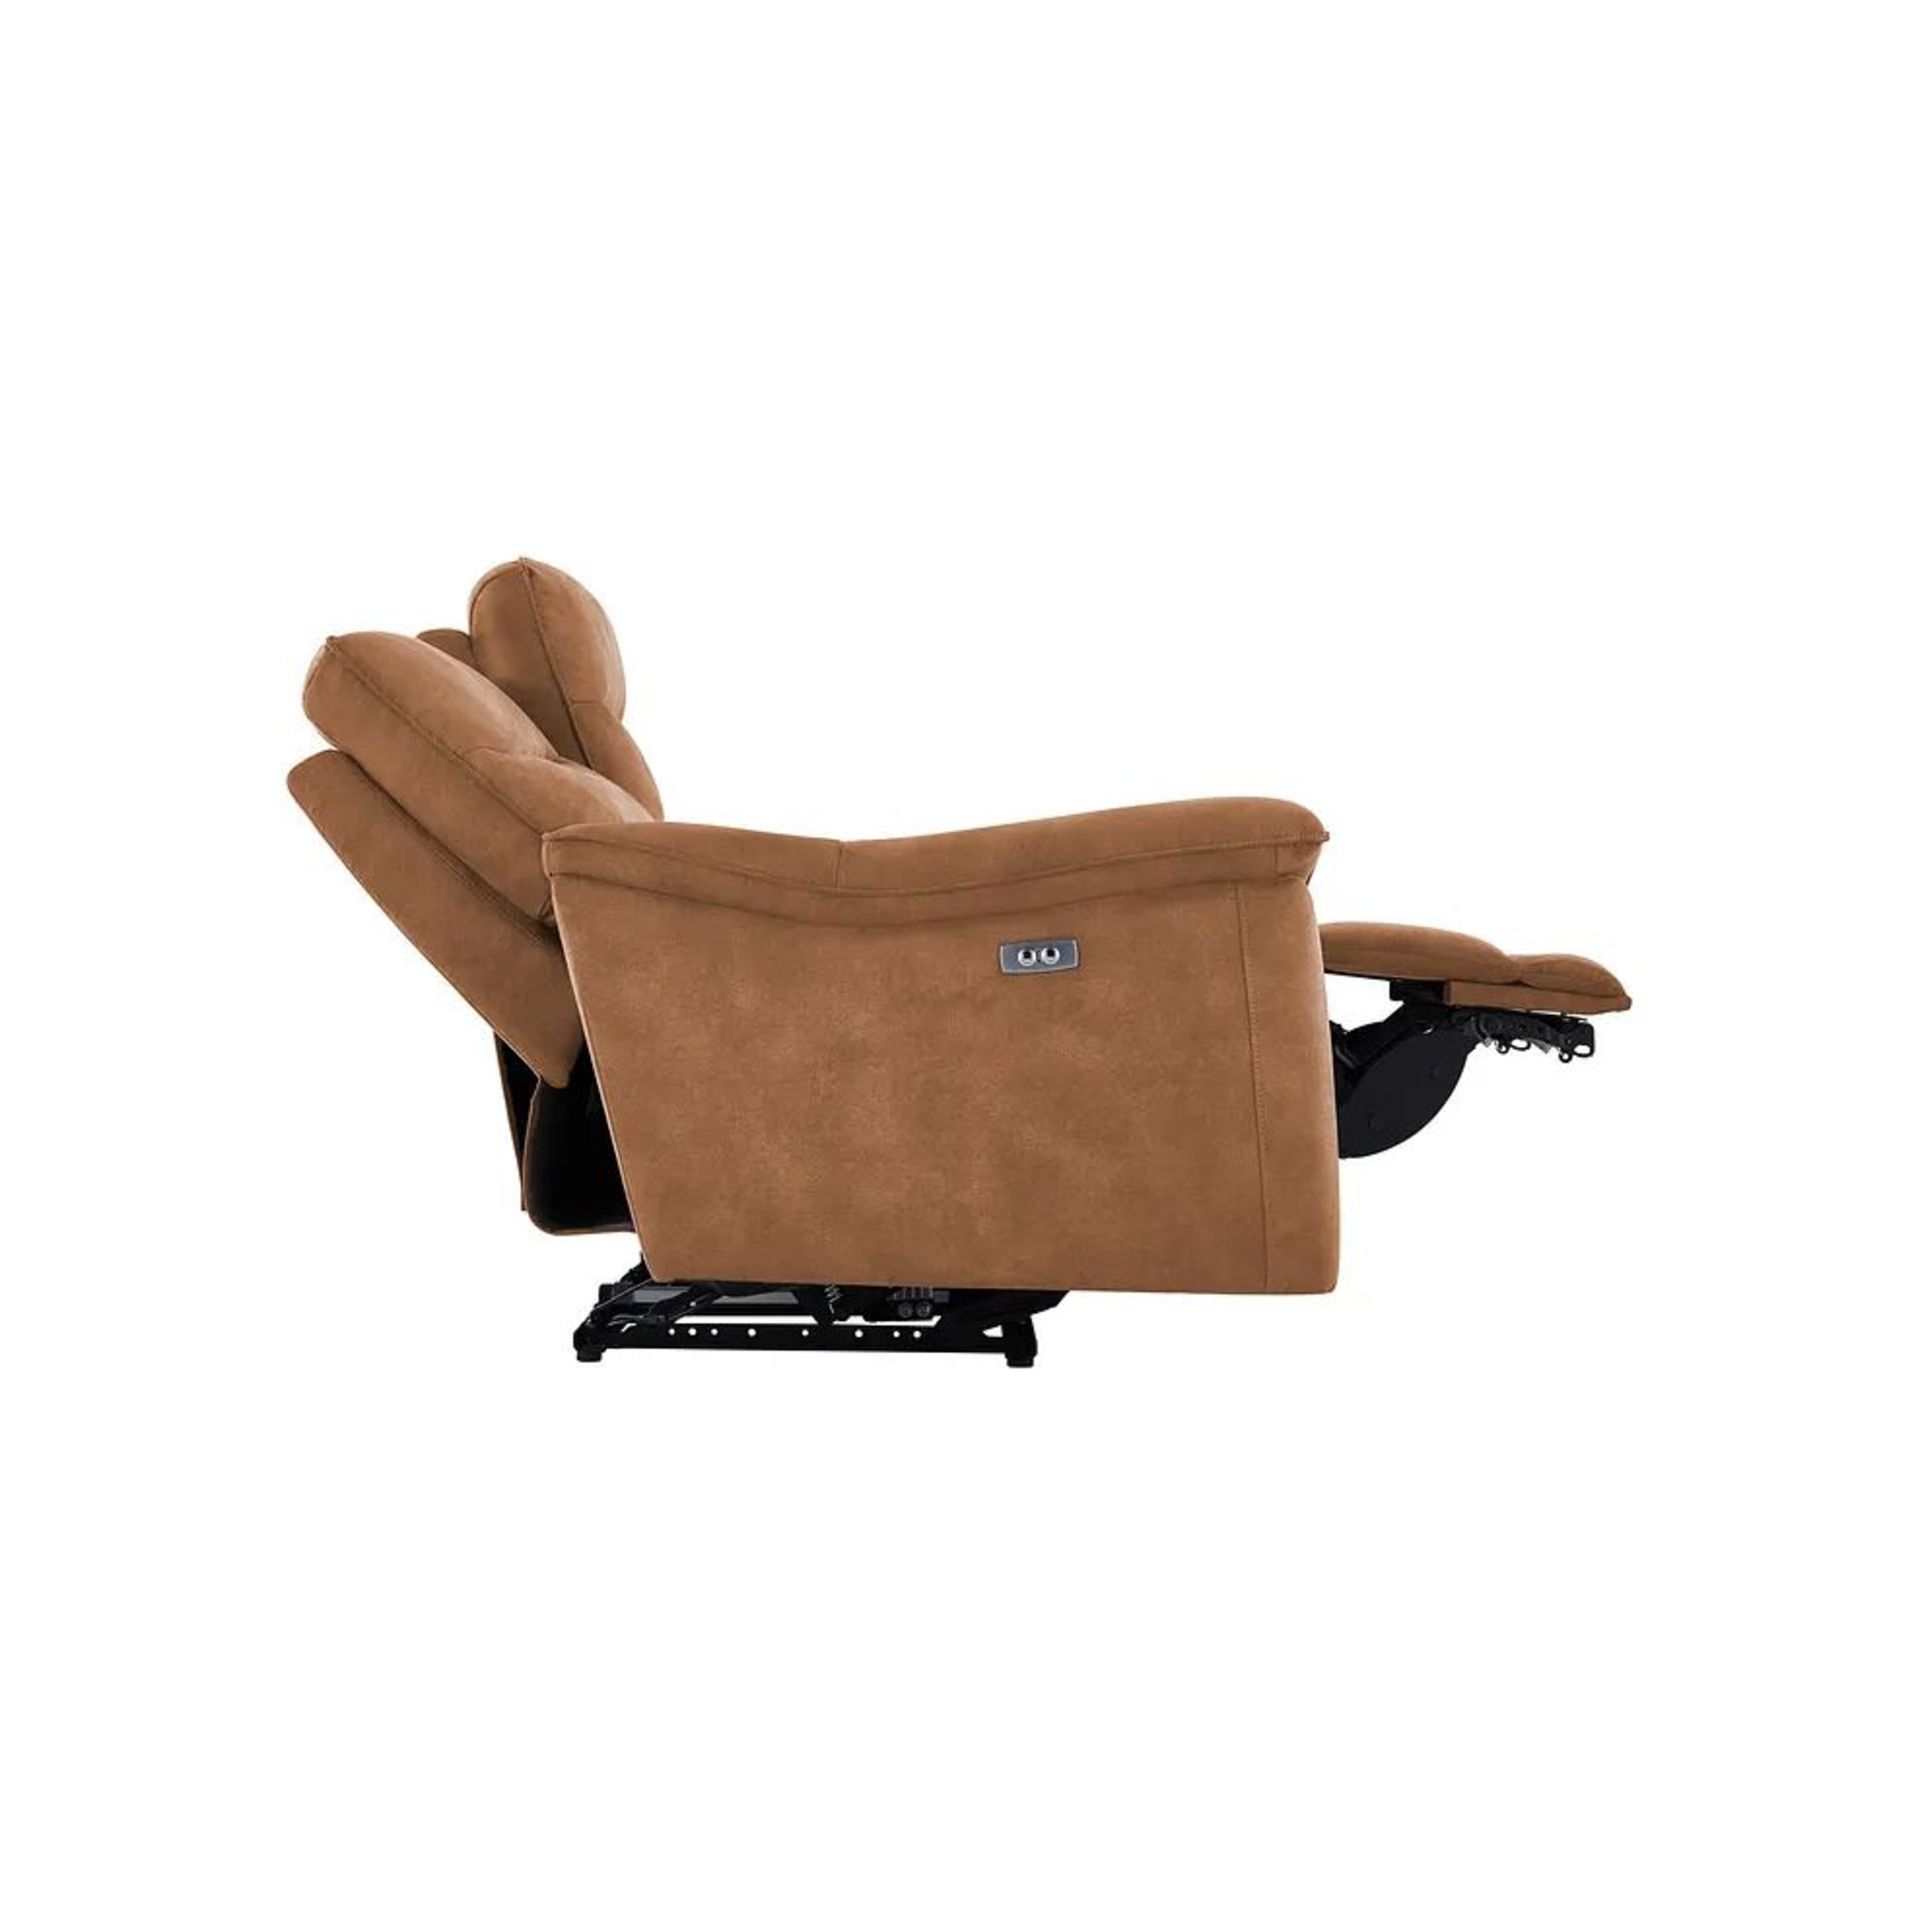 BRAND NEW CARTER 3 Seater Electric Recliner Sofa - BROWN FABRIC. RRP £1299. Shown here in Ranch - Image 8 of 12